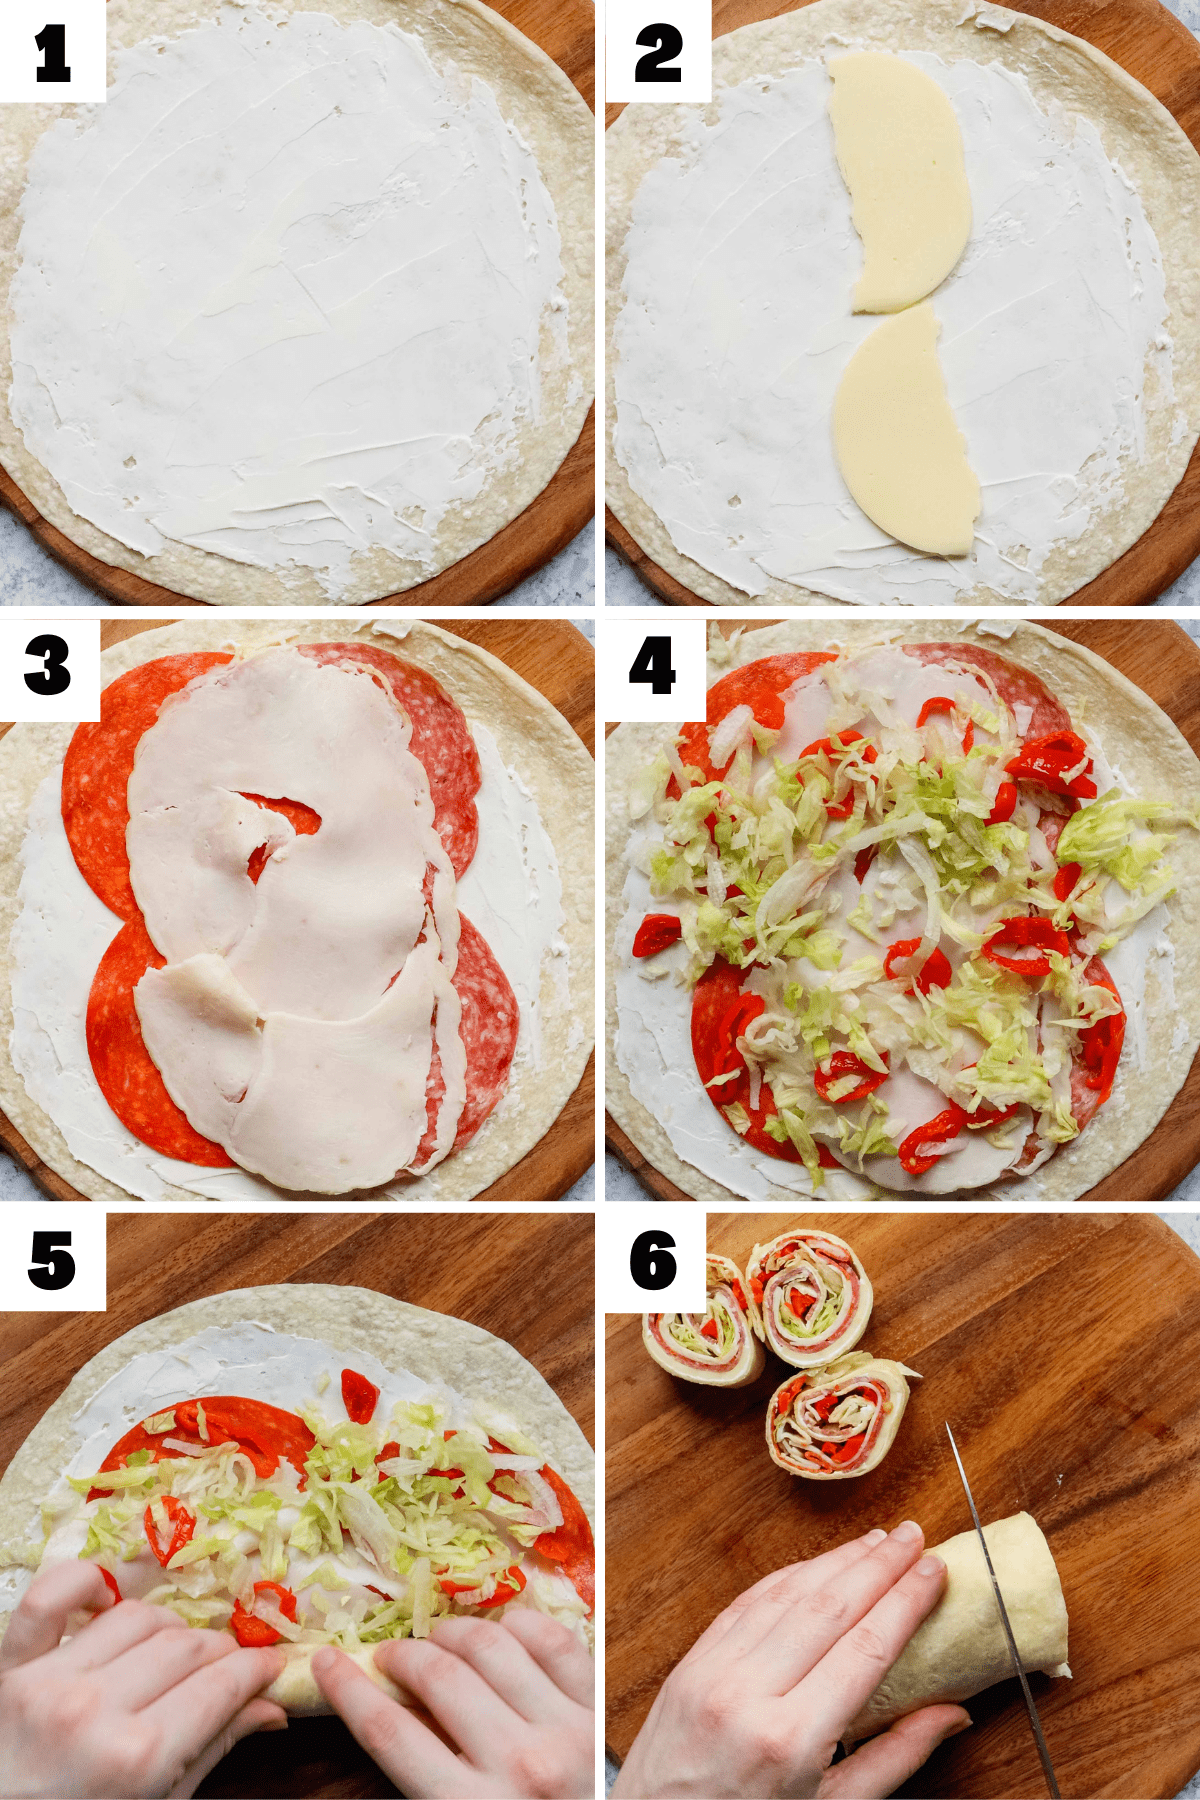 6 steps to making rolled sandwiches